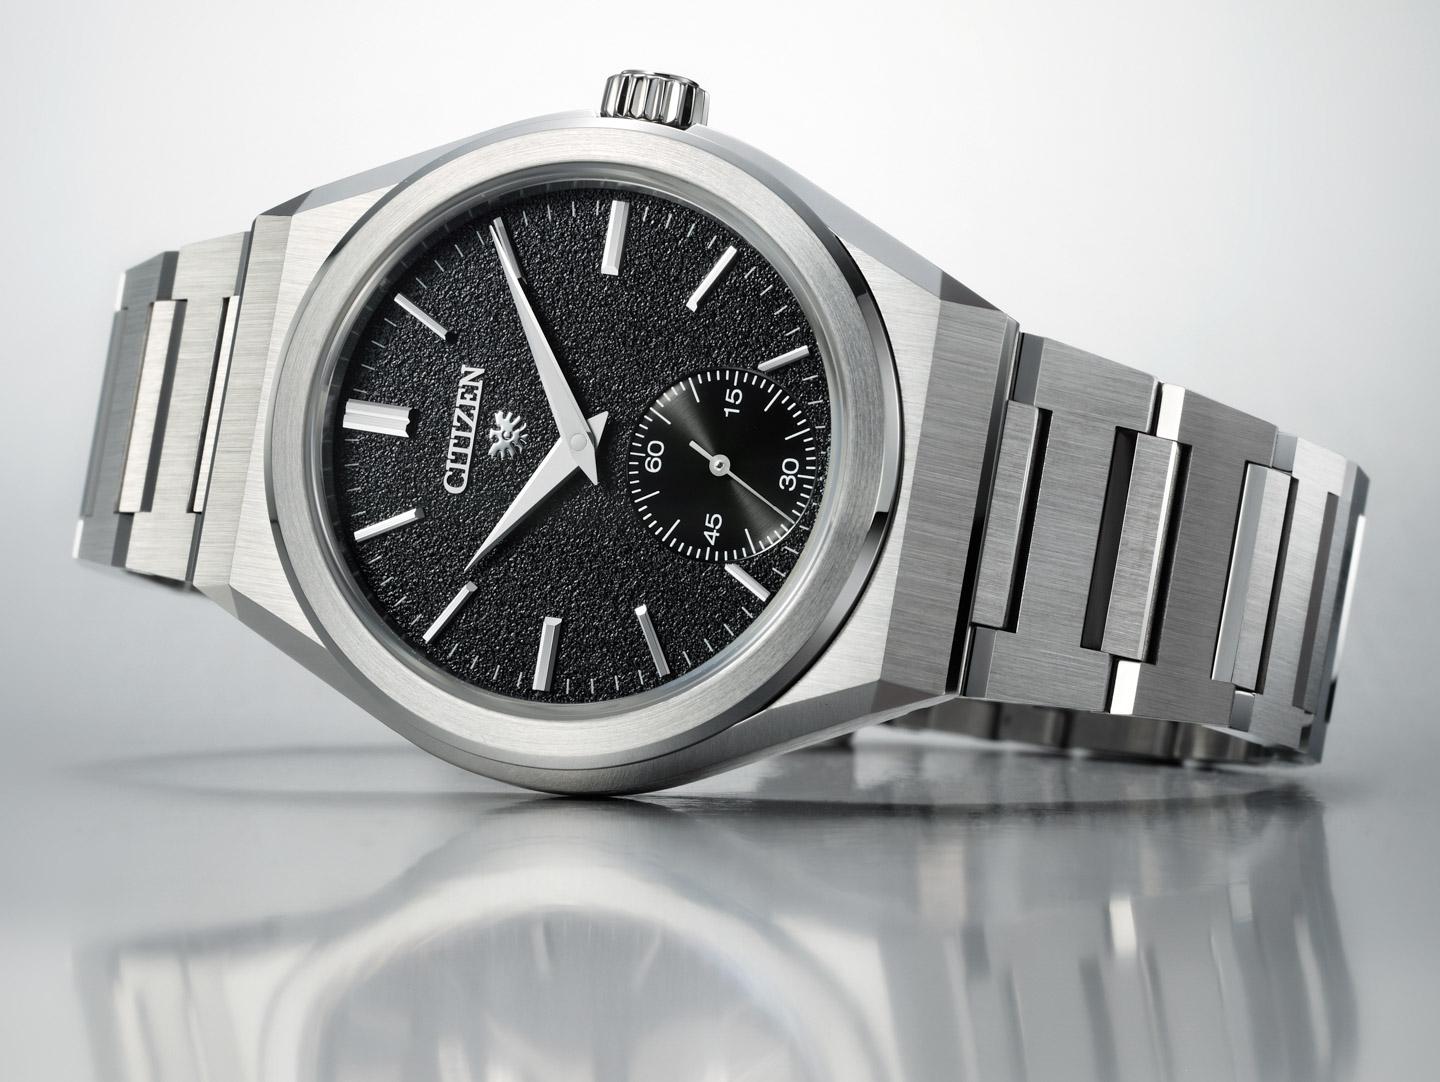 The Citizen Automatic Watch With Movement That Merges Japanese & Swiss | aBlogtoWatch